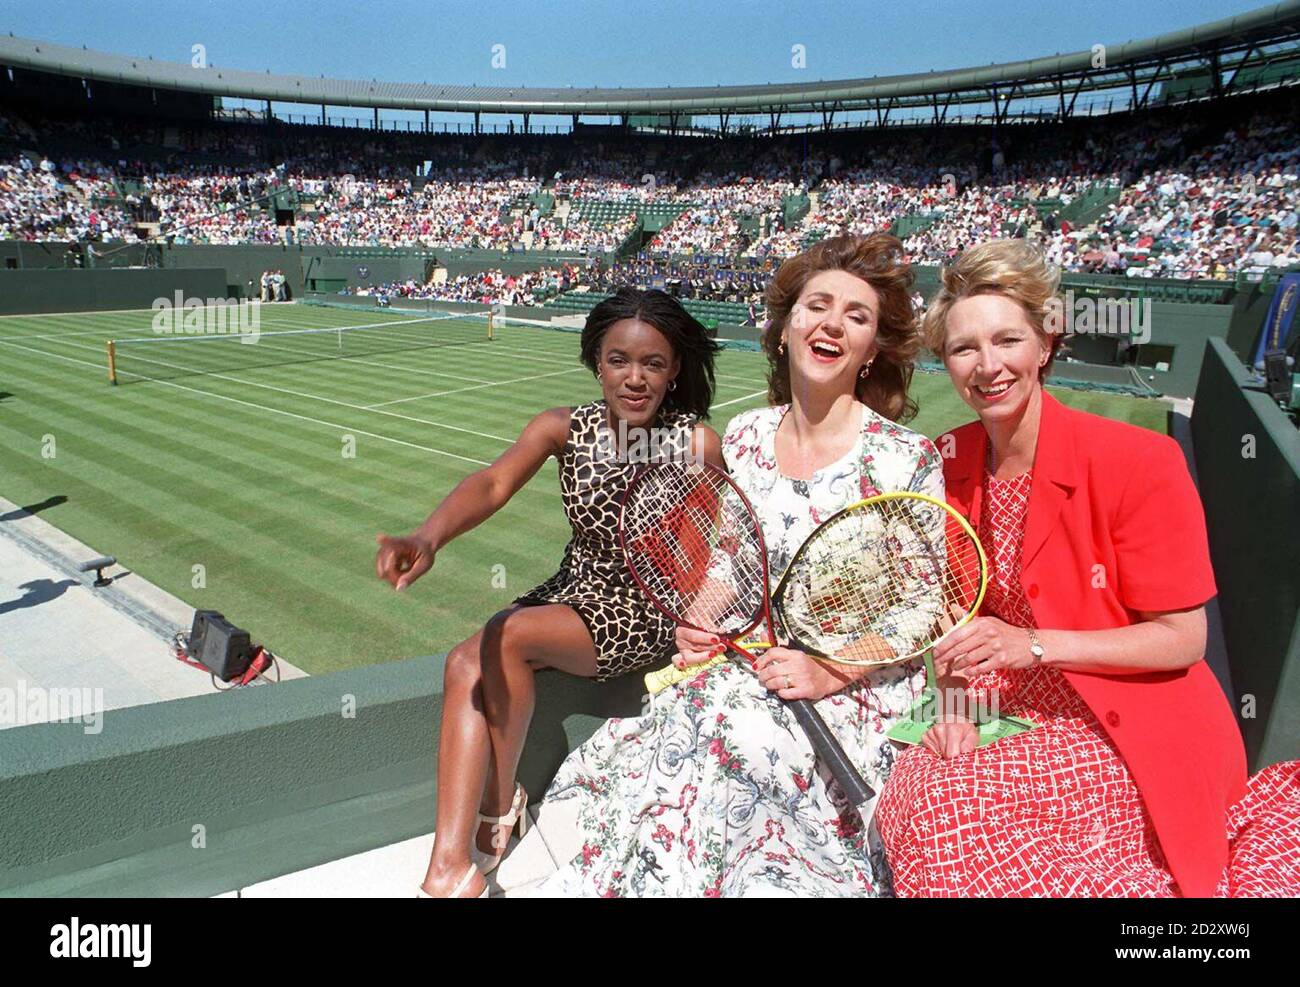 The first service on the new No.1 Court at Wimbledon had nothing to do with tennis